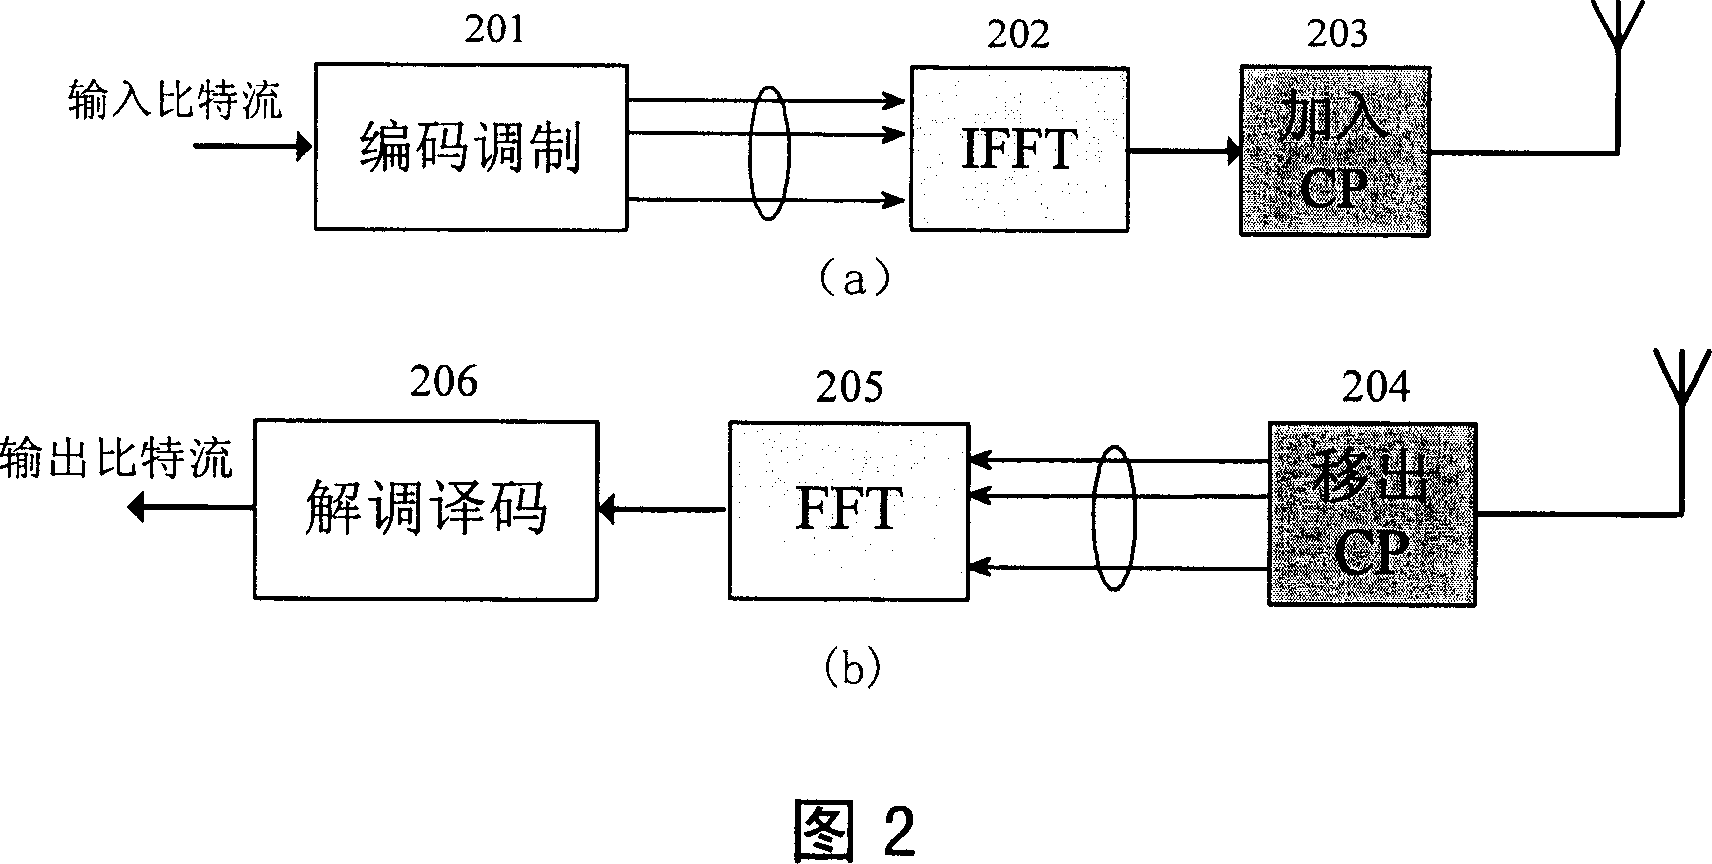 Orthogonal frequency division multiplexing signal transmitting method for reducing the inter-cell interference